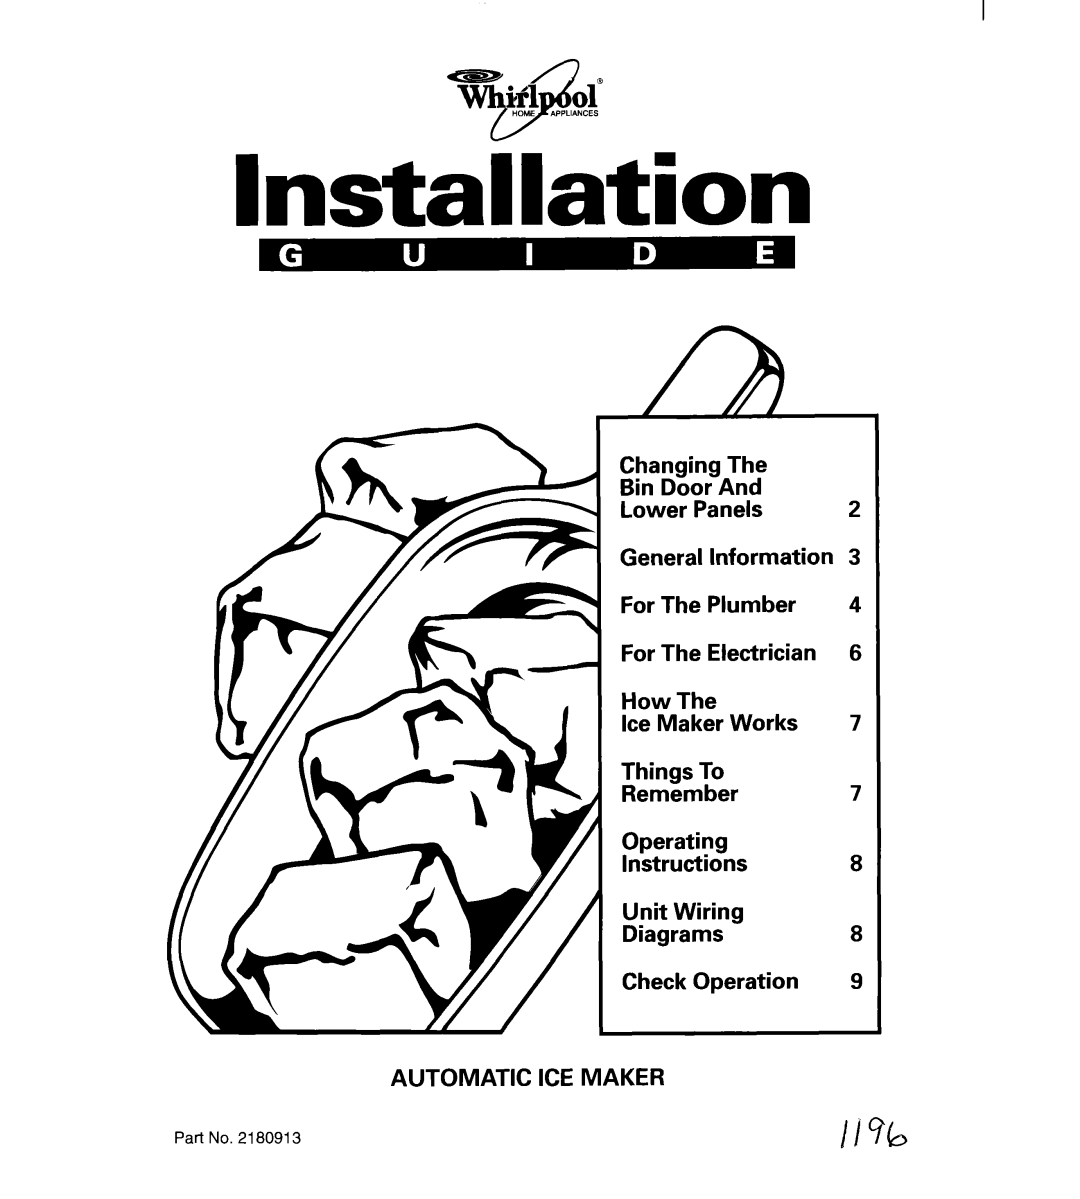 Whirlpool 2180913 manual Installation, Changing The Bin Door And Lower Panels, General Information For The Plumber 